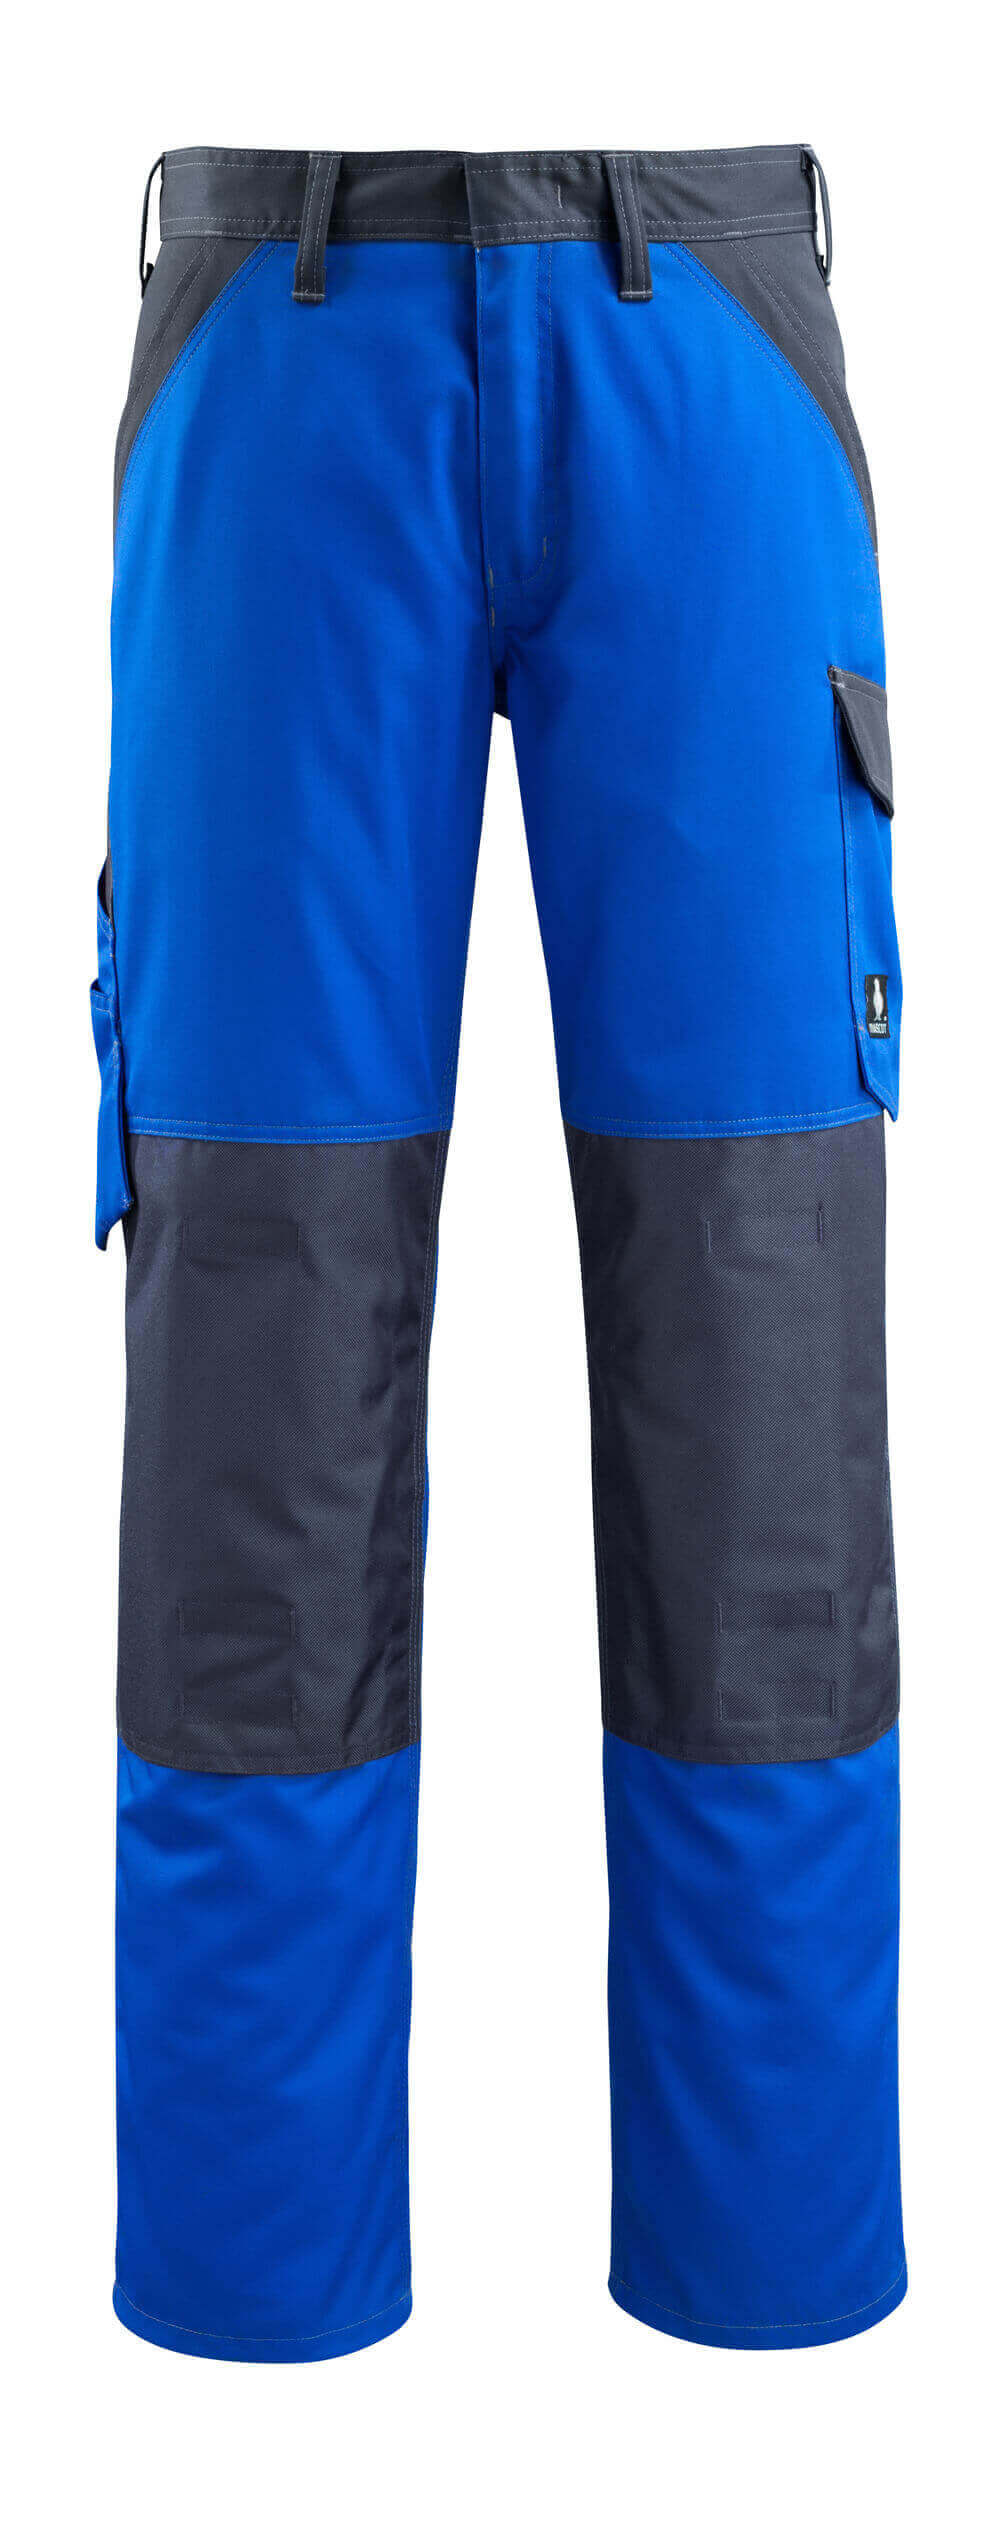 15779-330-11010 Trousers with kneepad pockets - royal/dark navy